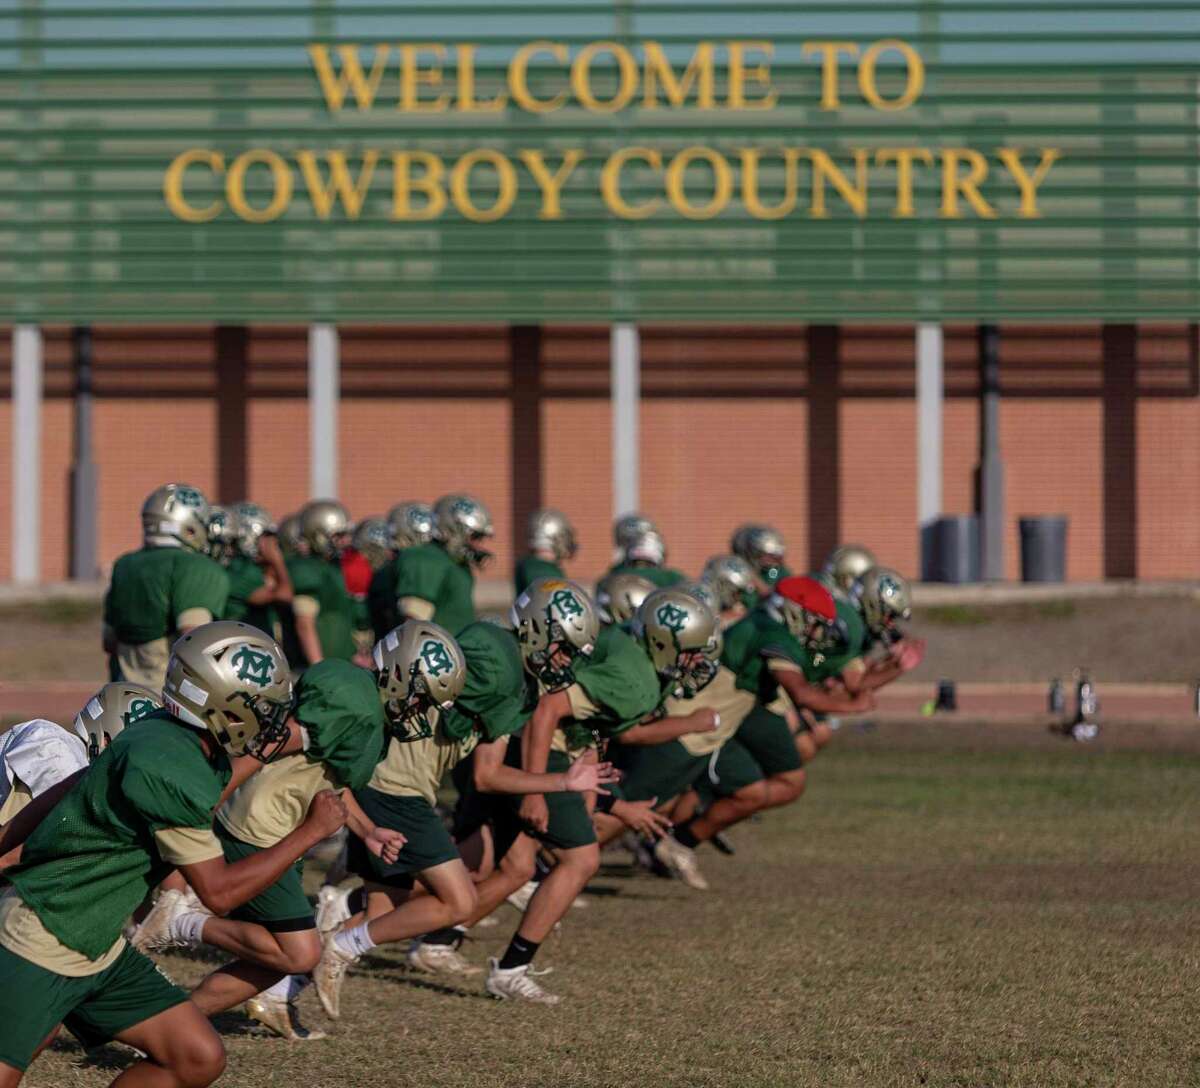 The McCollum Cowboys run through drills Wednesday, Nov. 11, 2020 as they prepare for their first game after having to forfeit three games due to positive COVID-19 coronavirus tests.